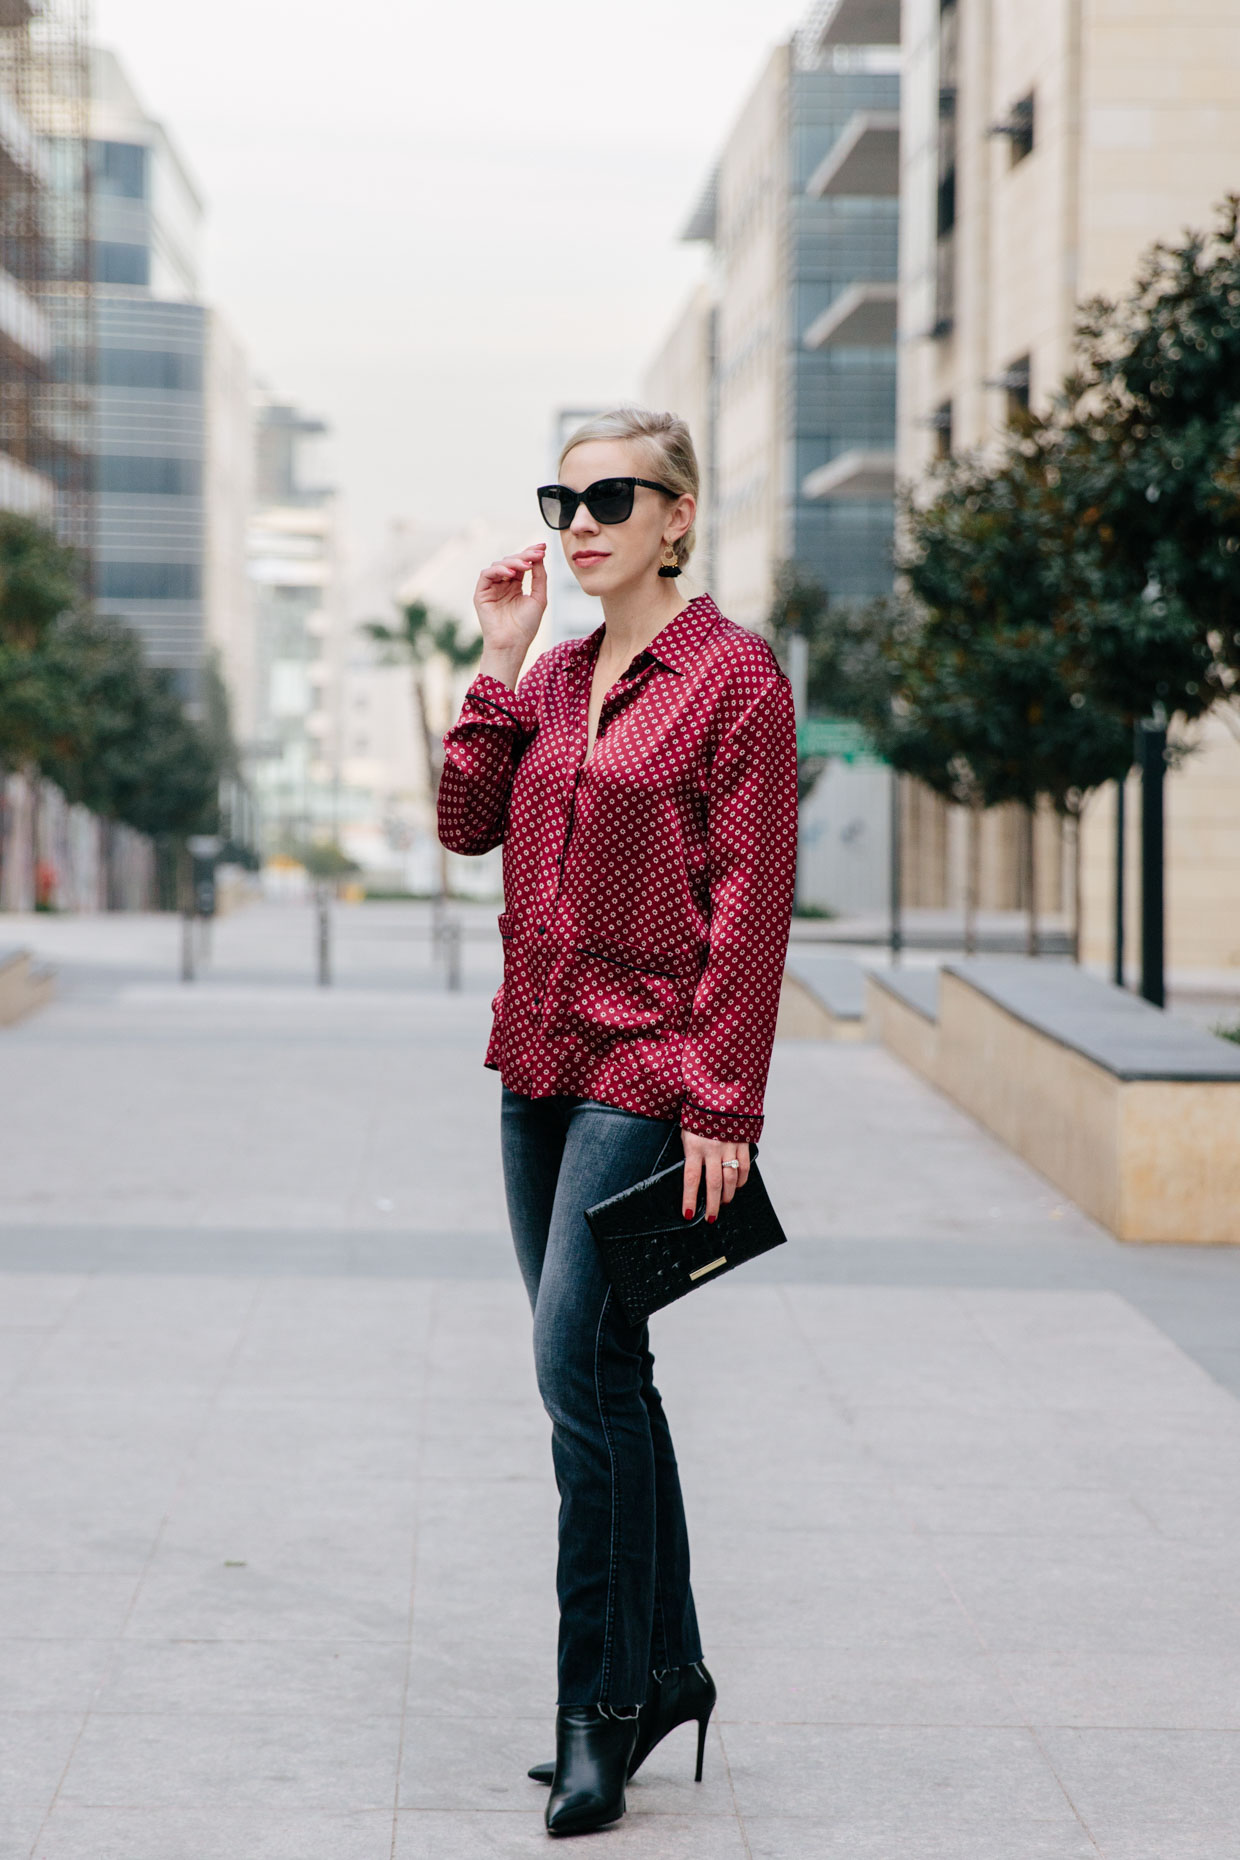 Casual New Year's Outfit: Silk Blouse, Straight Leg Jeans & Sock Boots